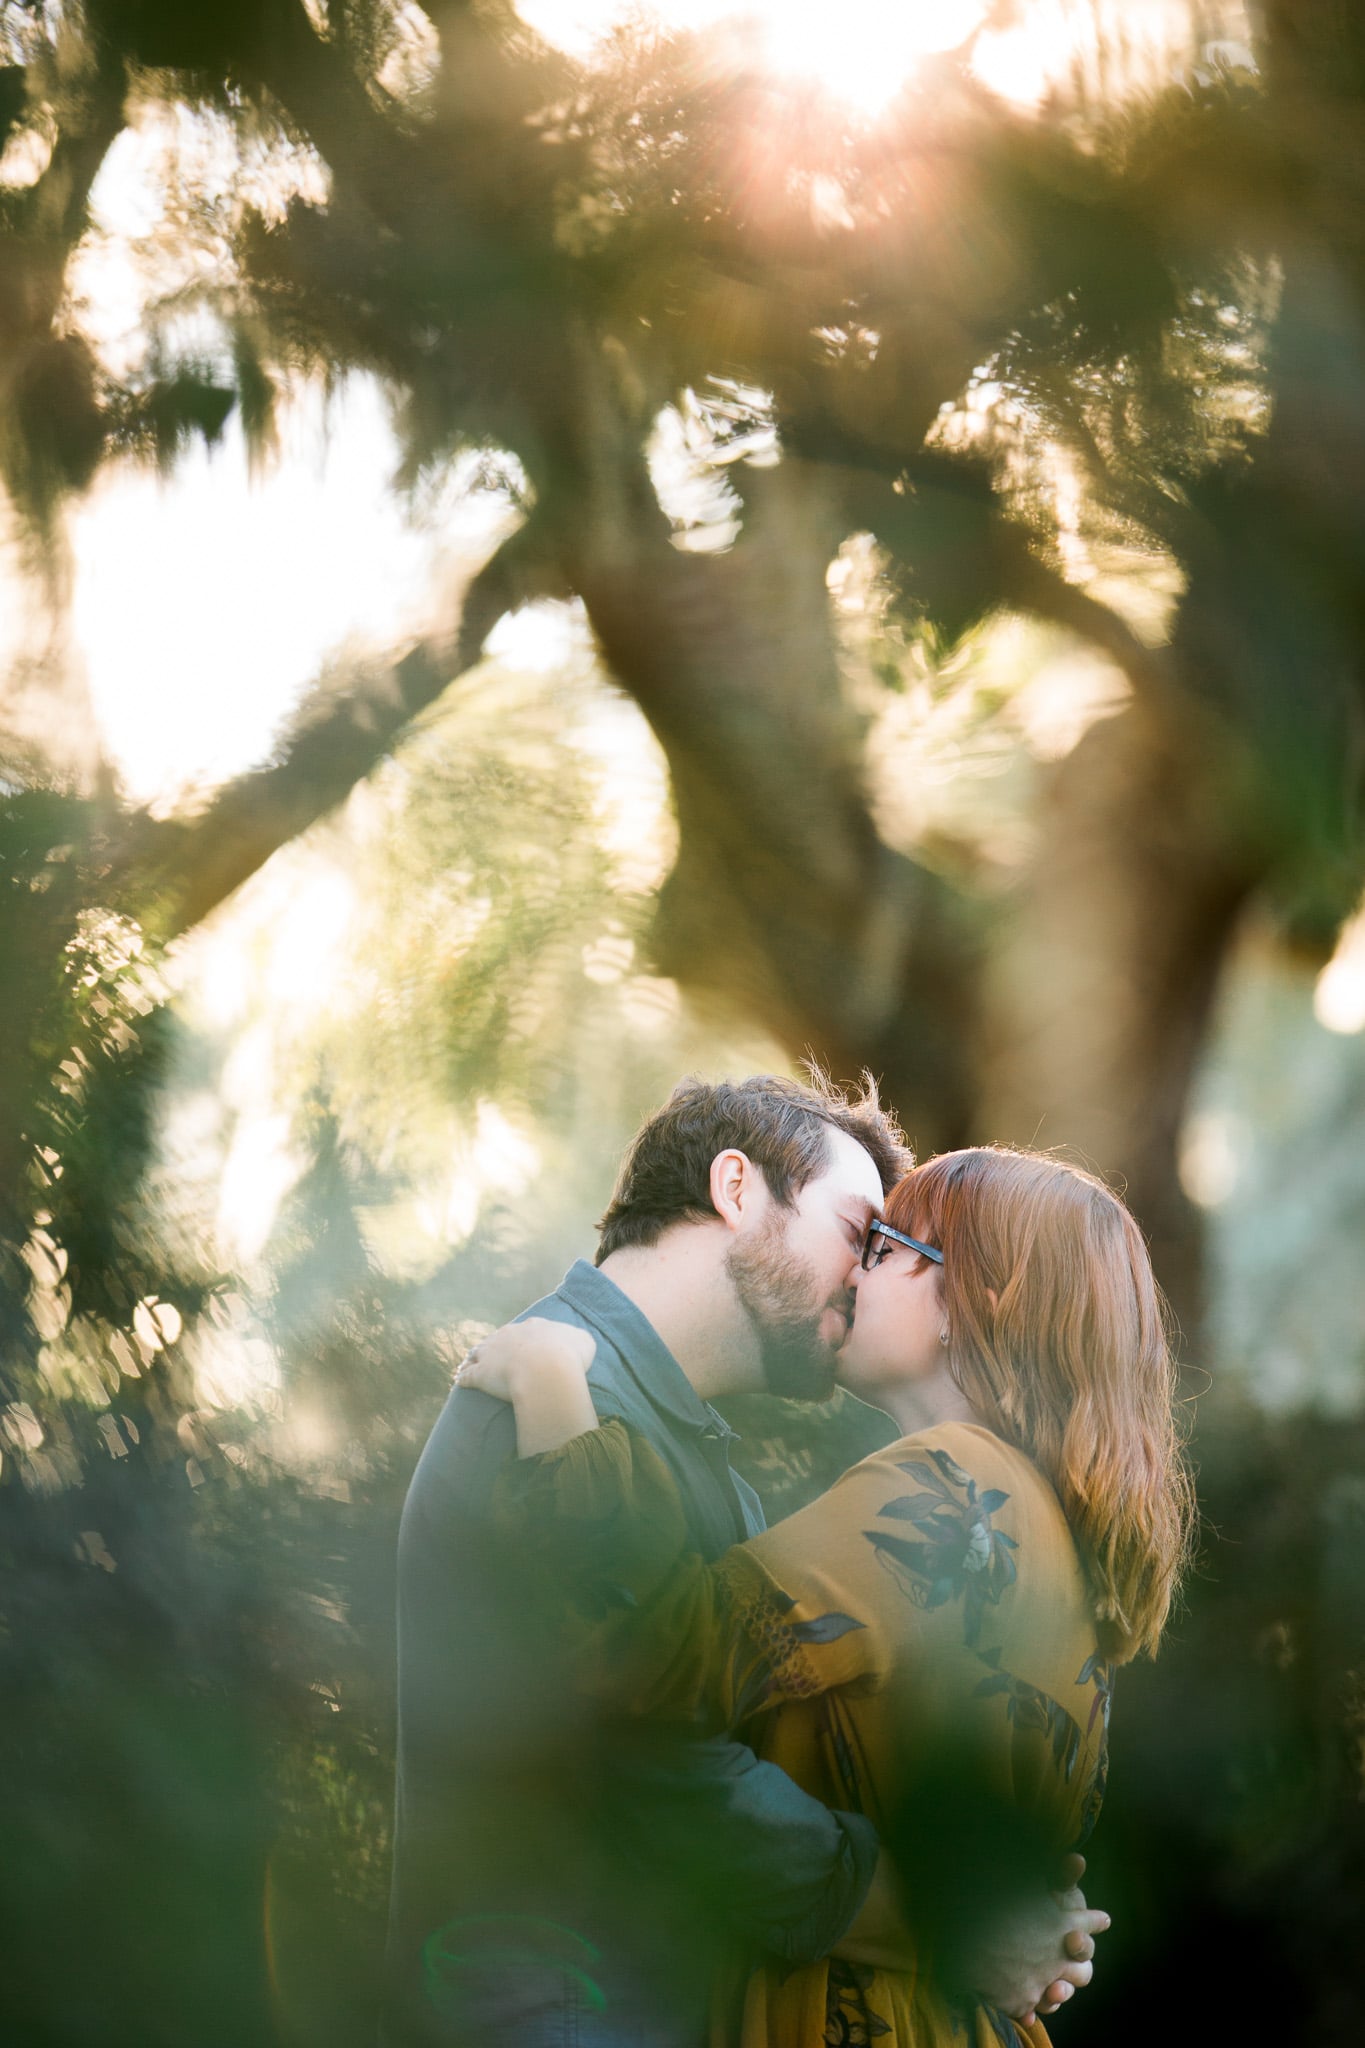 Brian and Kelsey kissing as viewed through leaves, Caledonia Golf and Fish Club, Myrtle Beach Engagement Session 19, www.onelifephoto.net